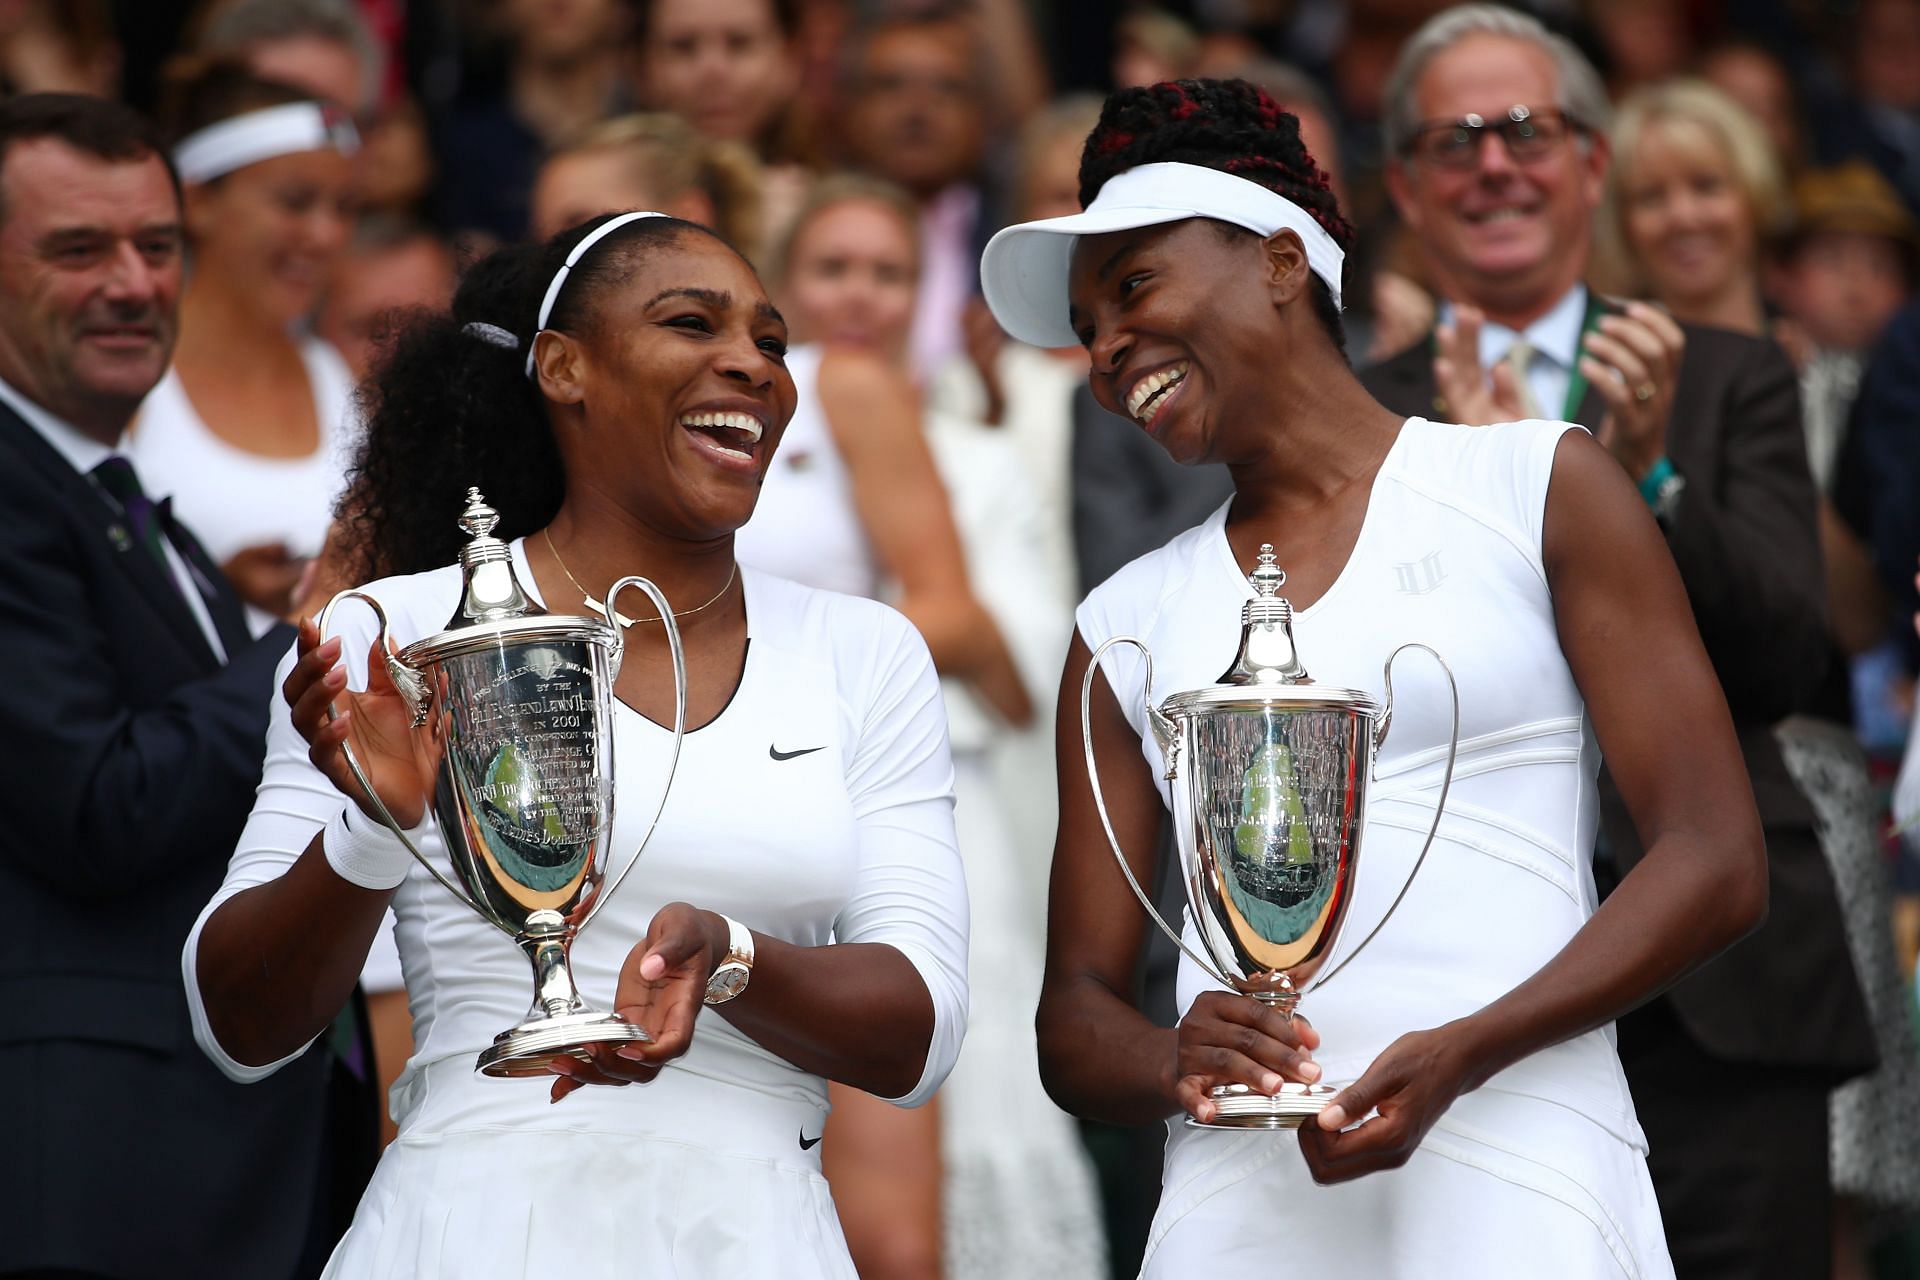 Serena and Venus Williams won the doubles trophy at Wimbledon 2016